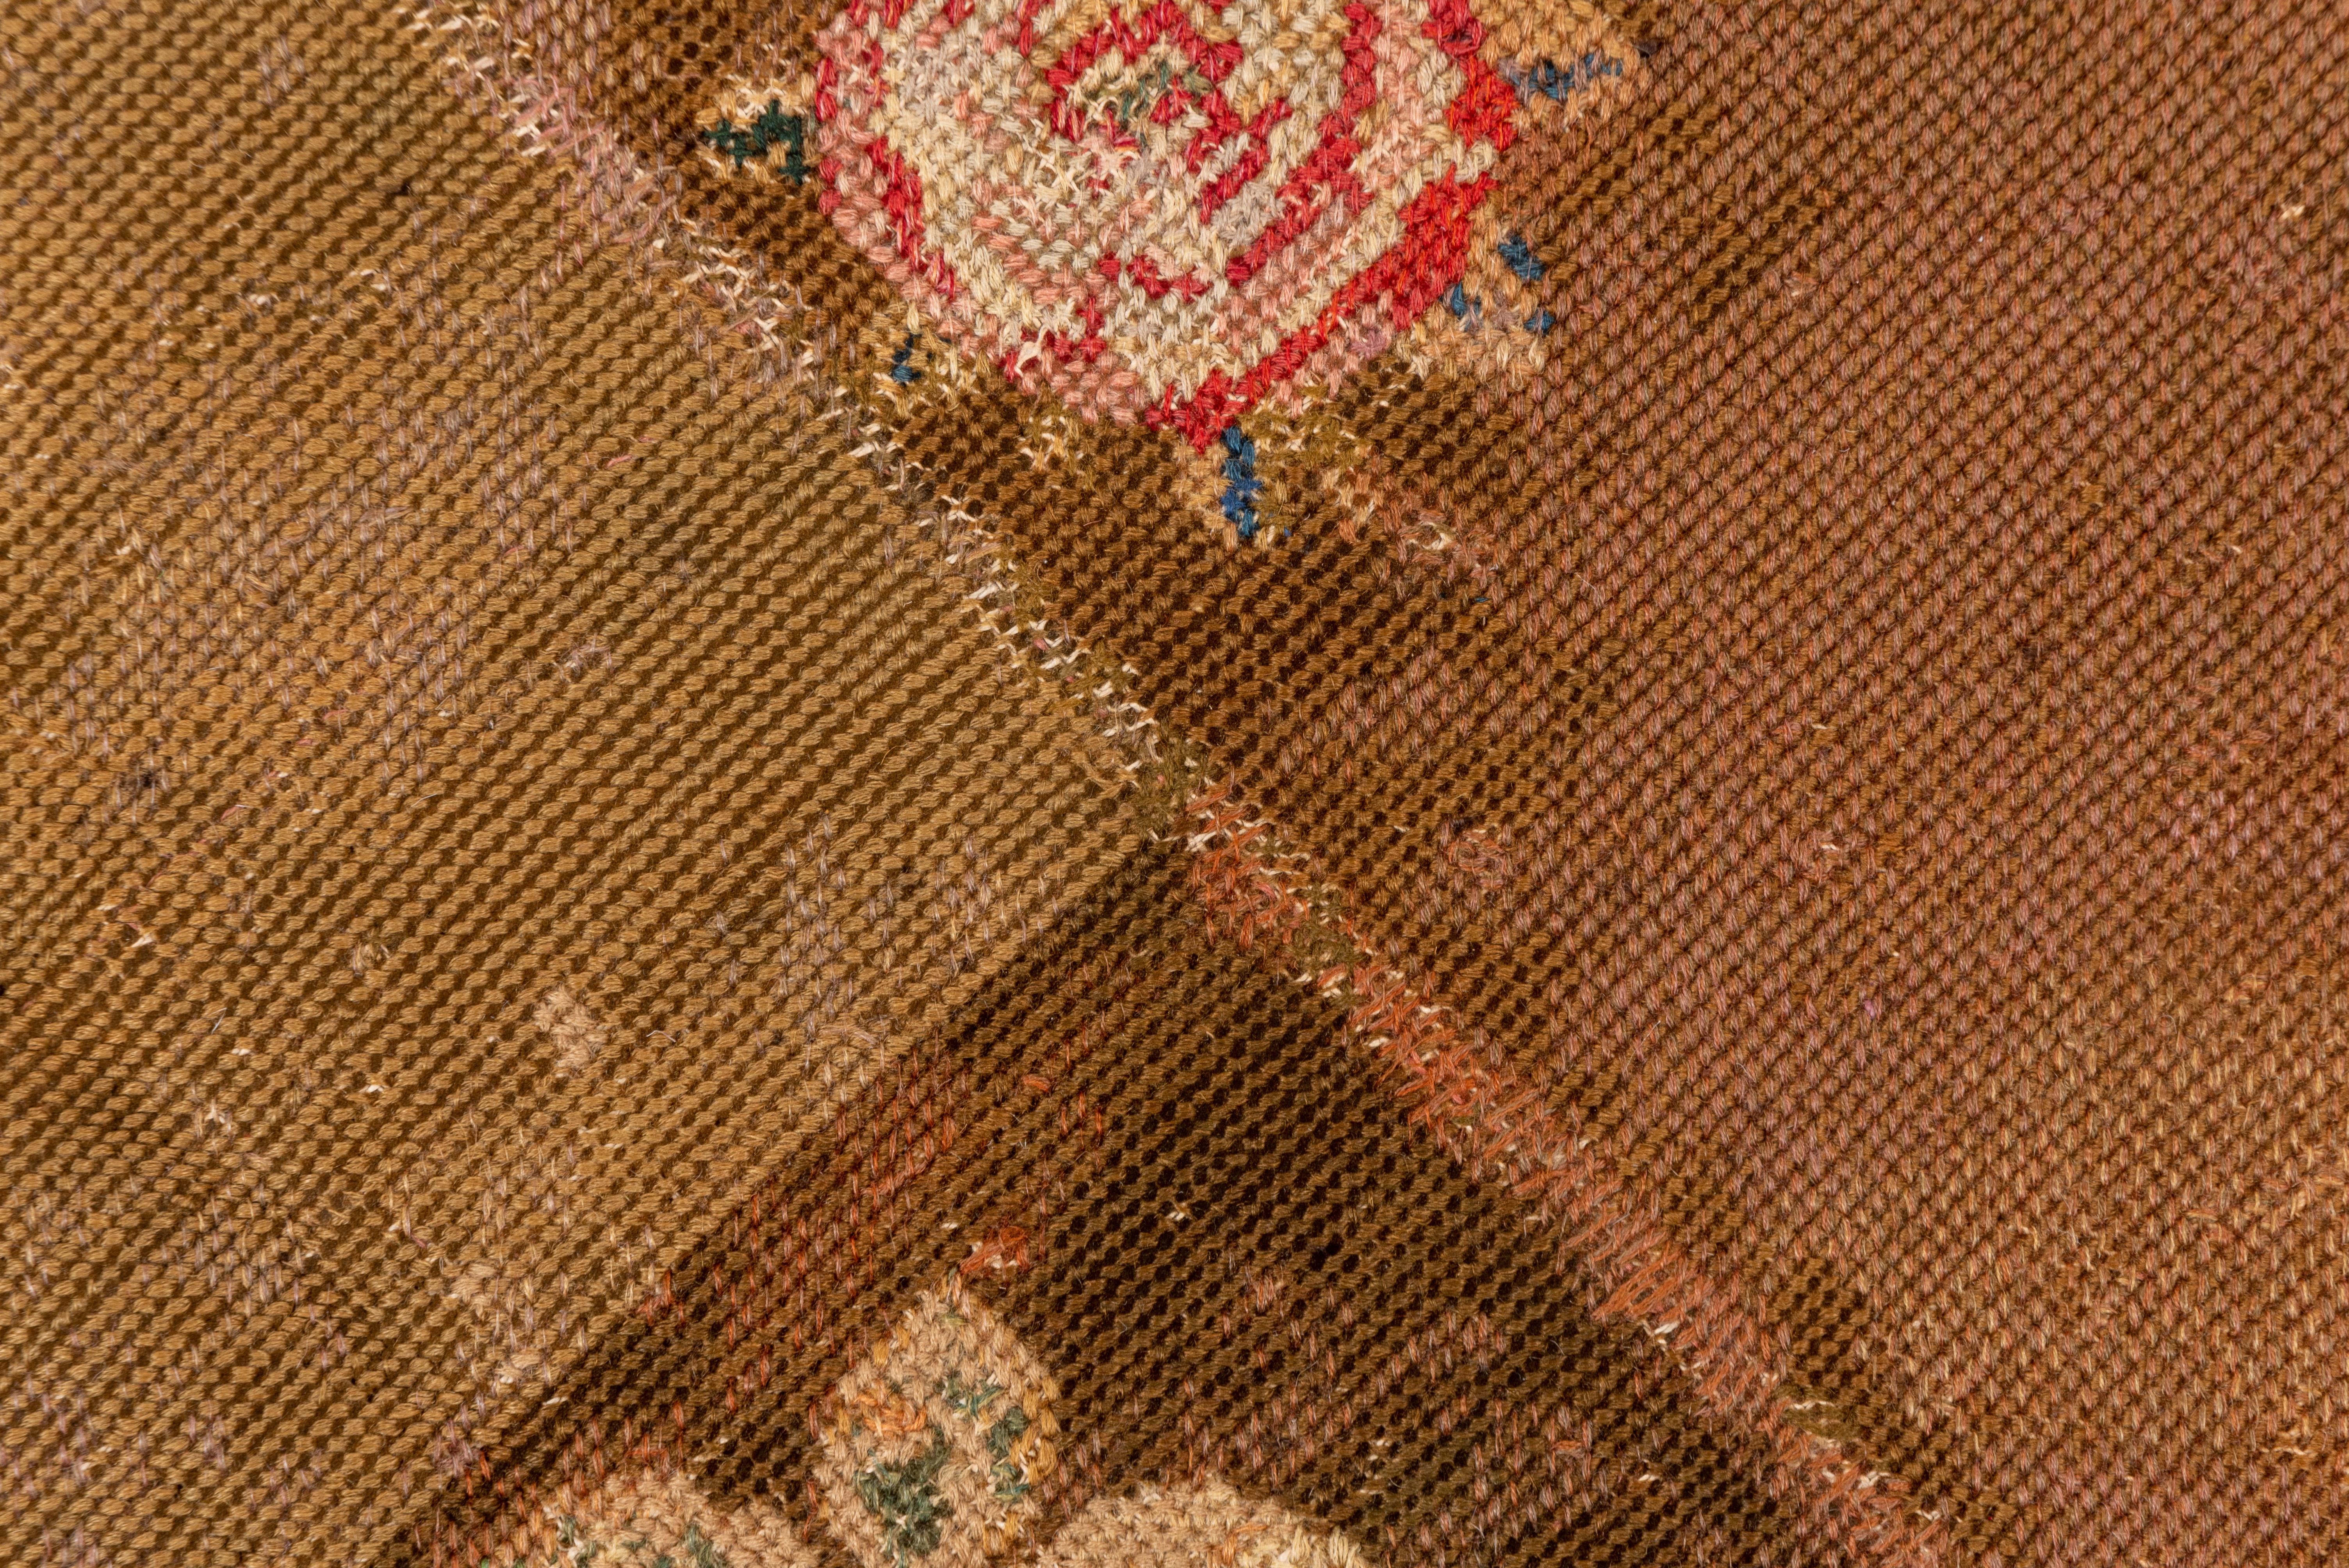 The clearly sectioned rust brown field displays offset rows of rose bouquets, all around a layered round medallion in bubble-gum and buff with a central leaf octofoil. Pink border with a rose pattern.